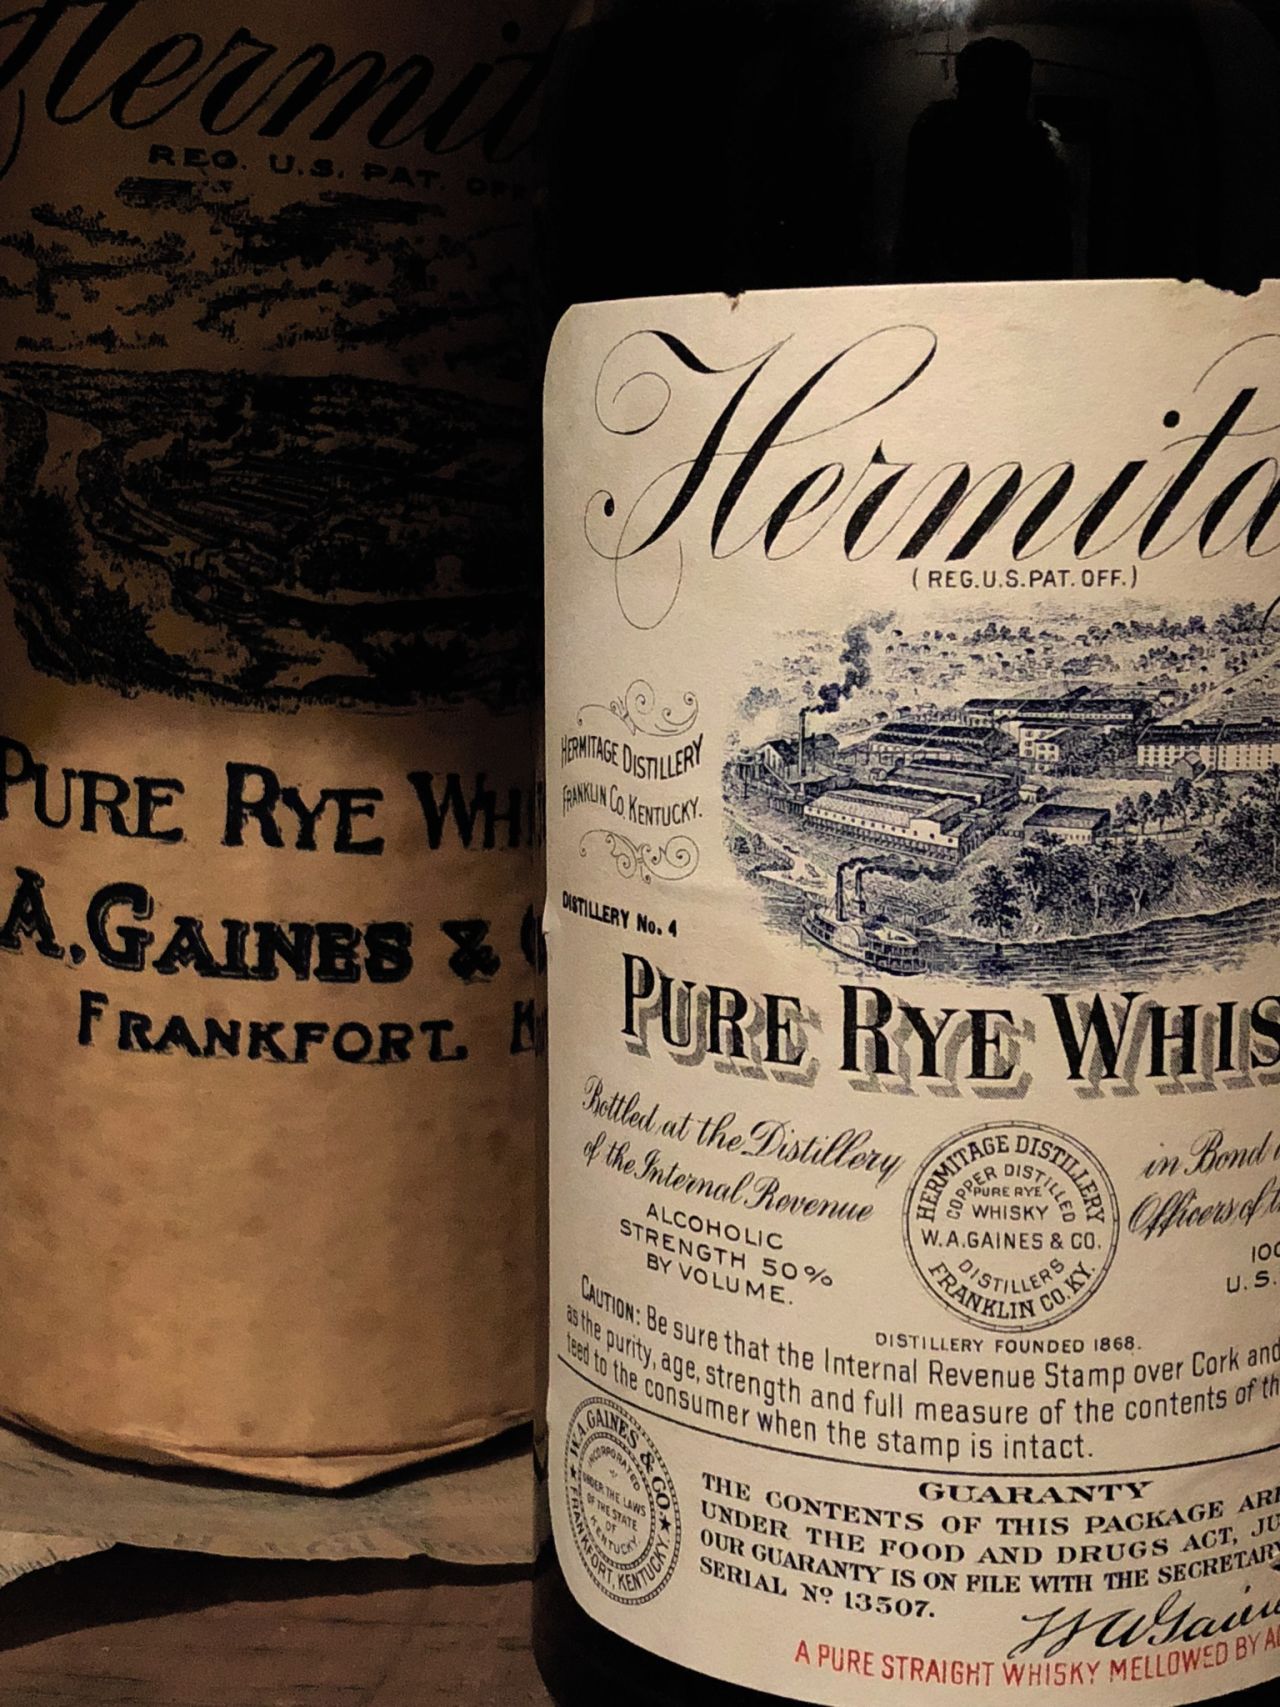 The auction will also include rye whiskeys bottled in the 1930s, which were particularly rare due to grain shortages.